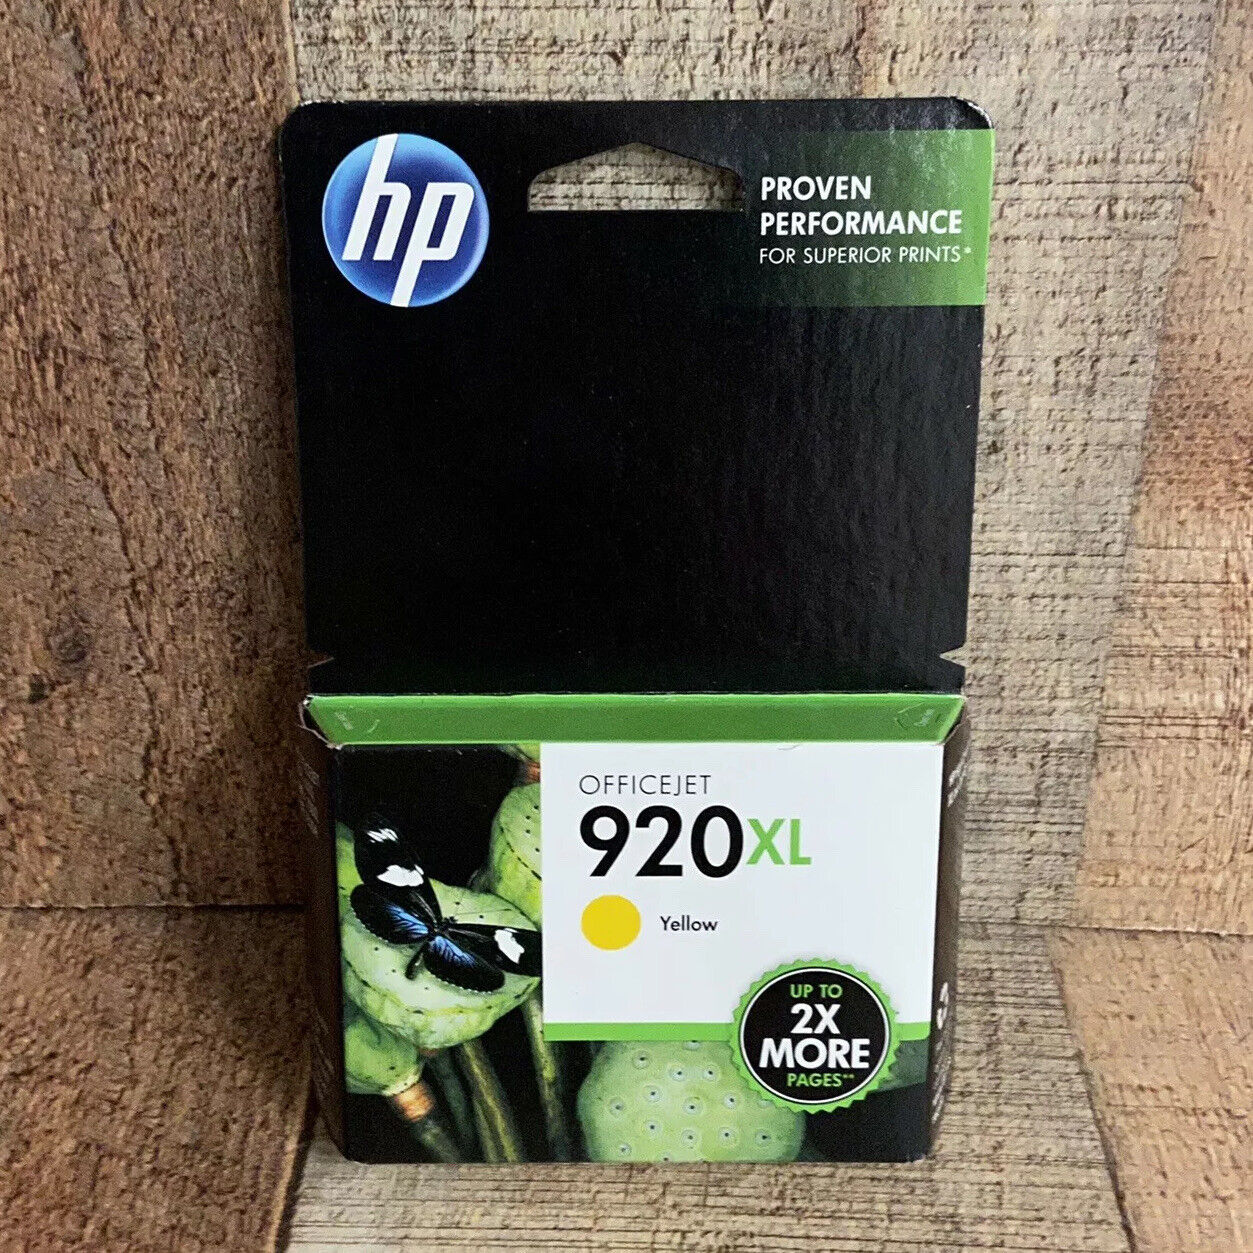 New Genuine HP 920XL Yellow Ink Cartridge  (CD974AN) Expired December 2013